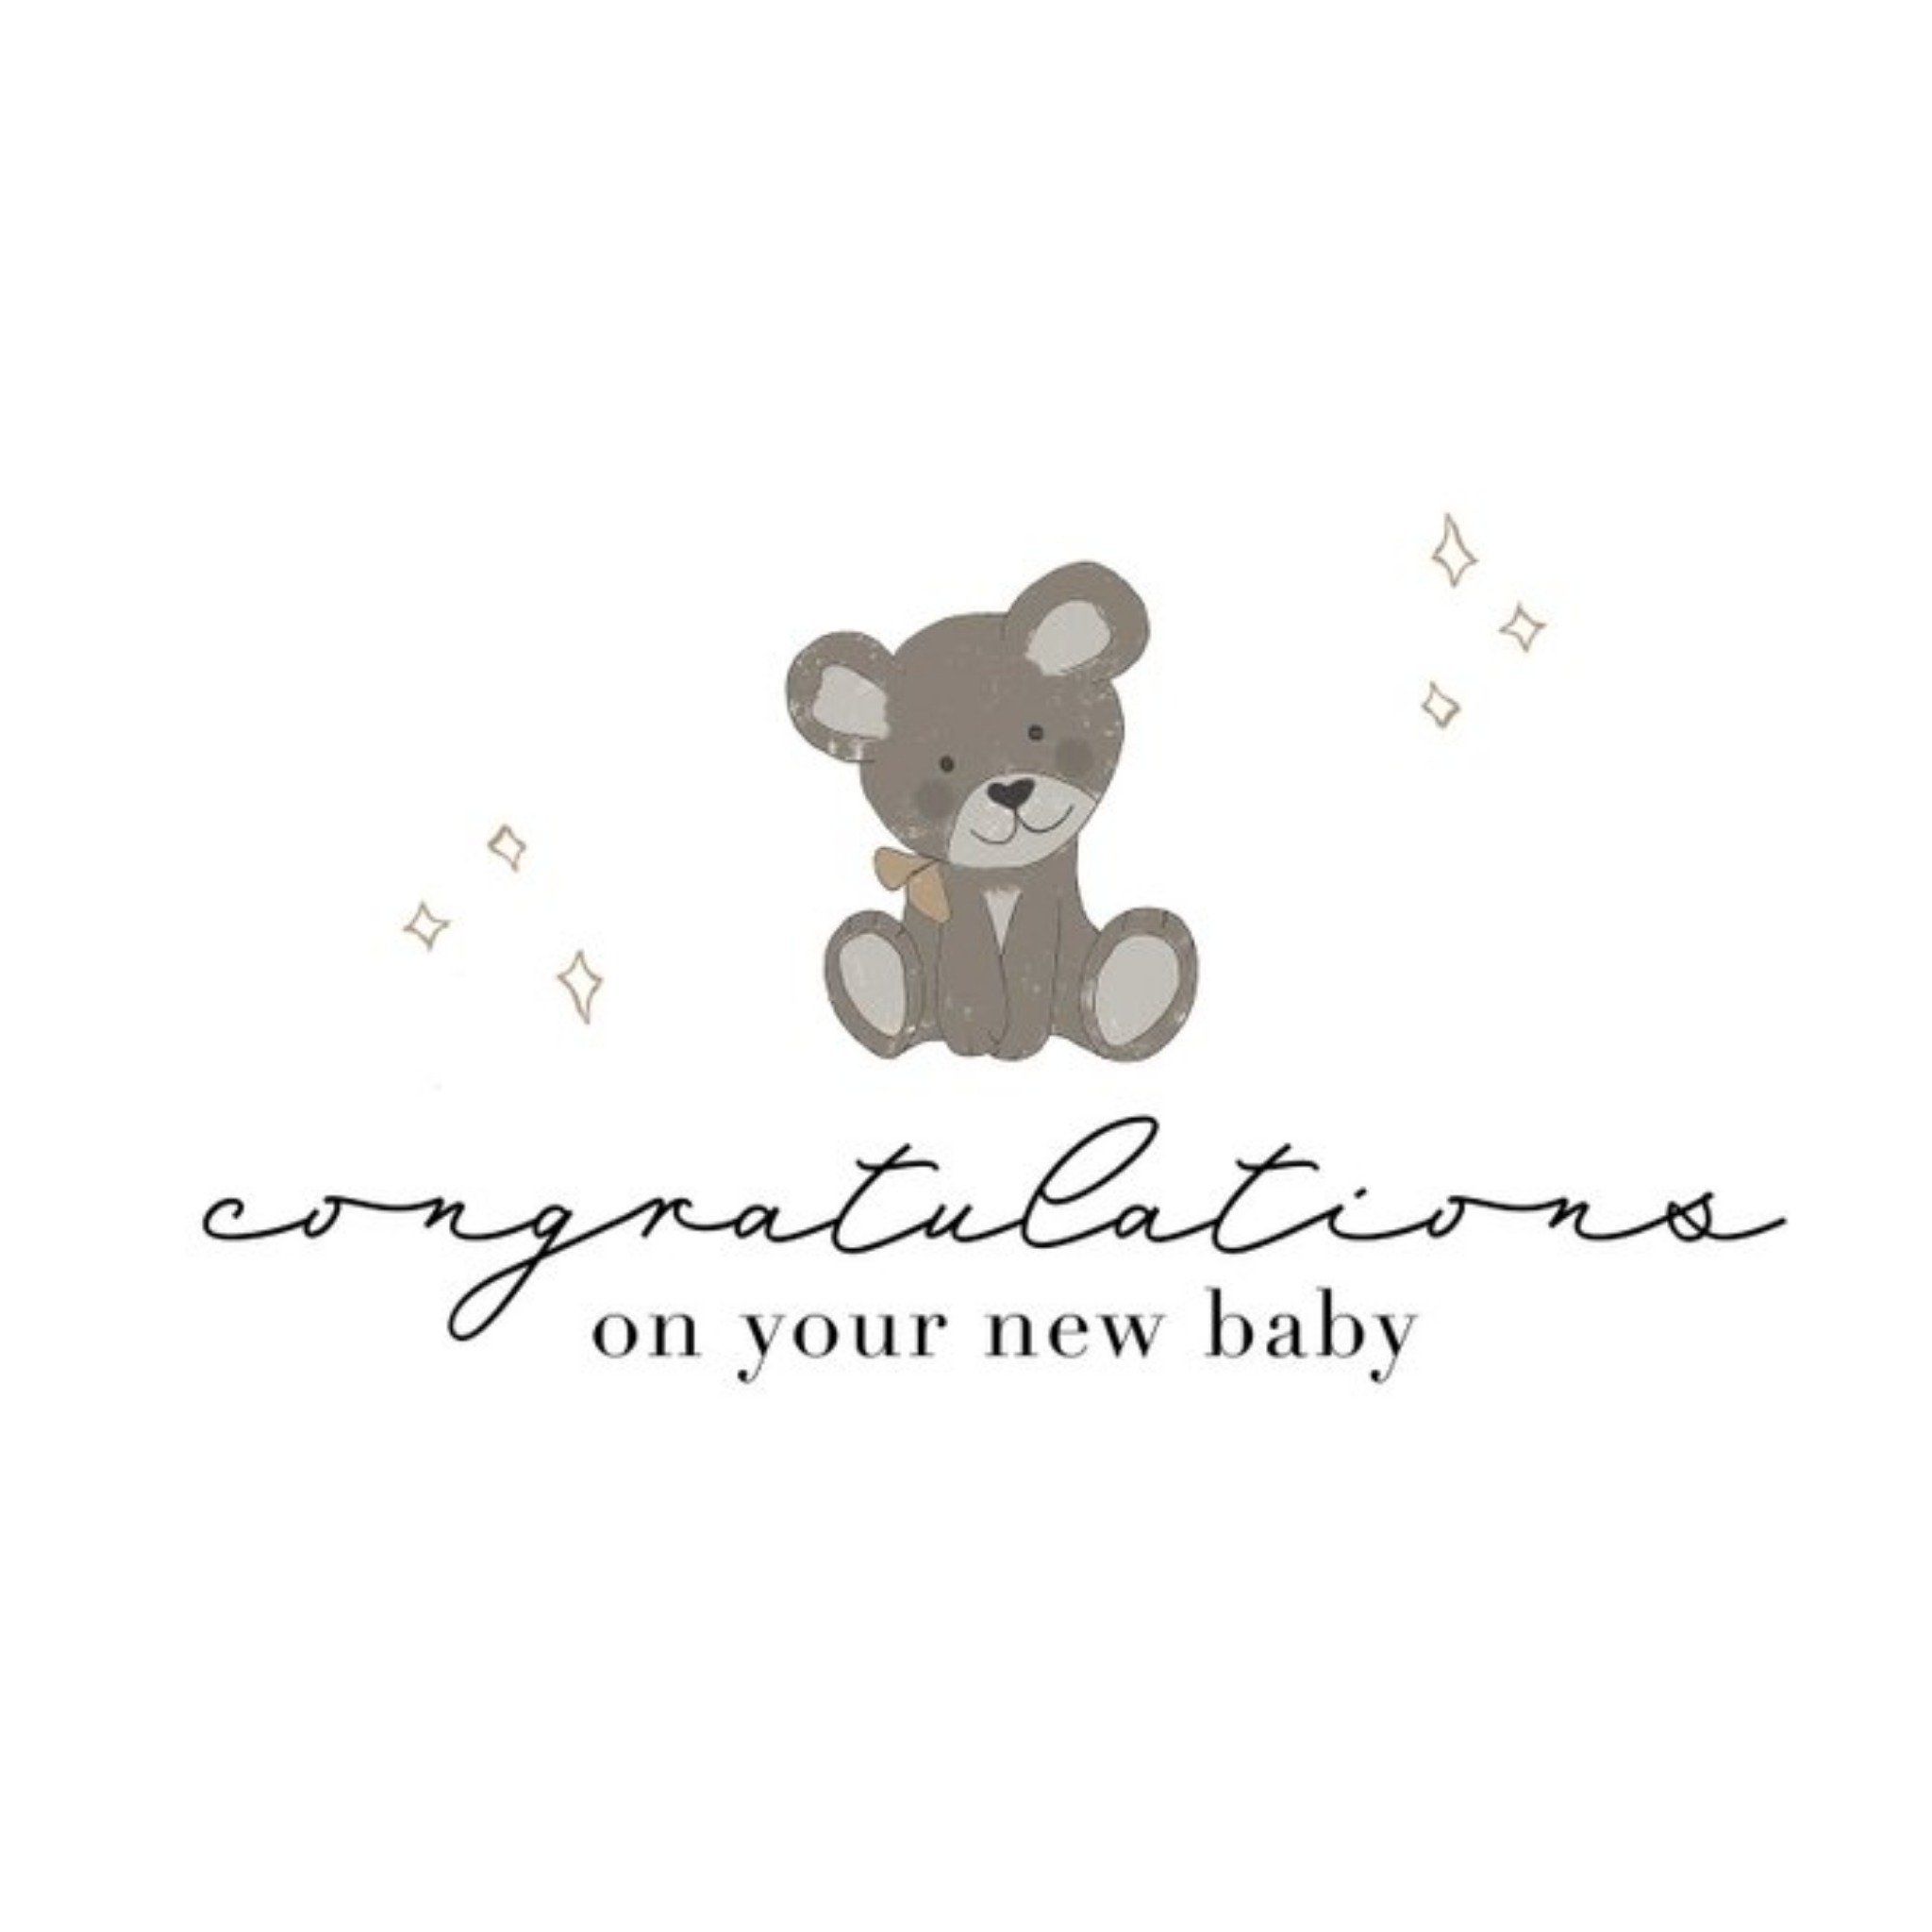 Moonpig Gabriel Neil Congratulations On Your New Baby Card, Large